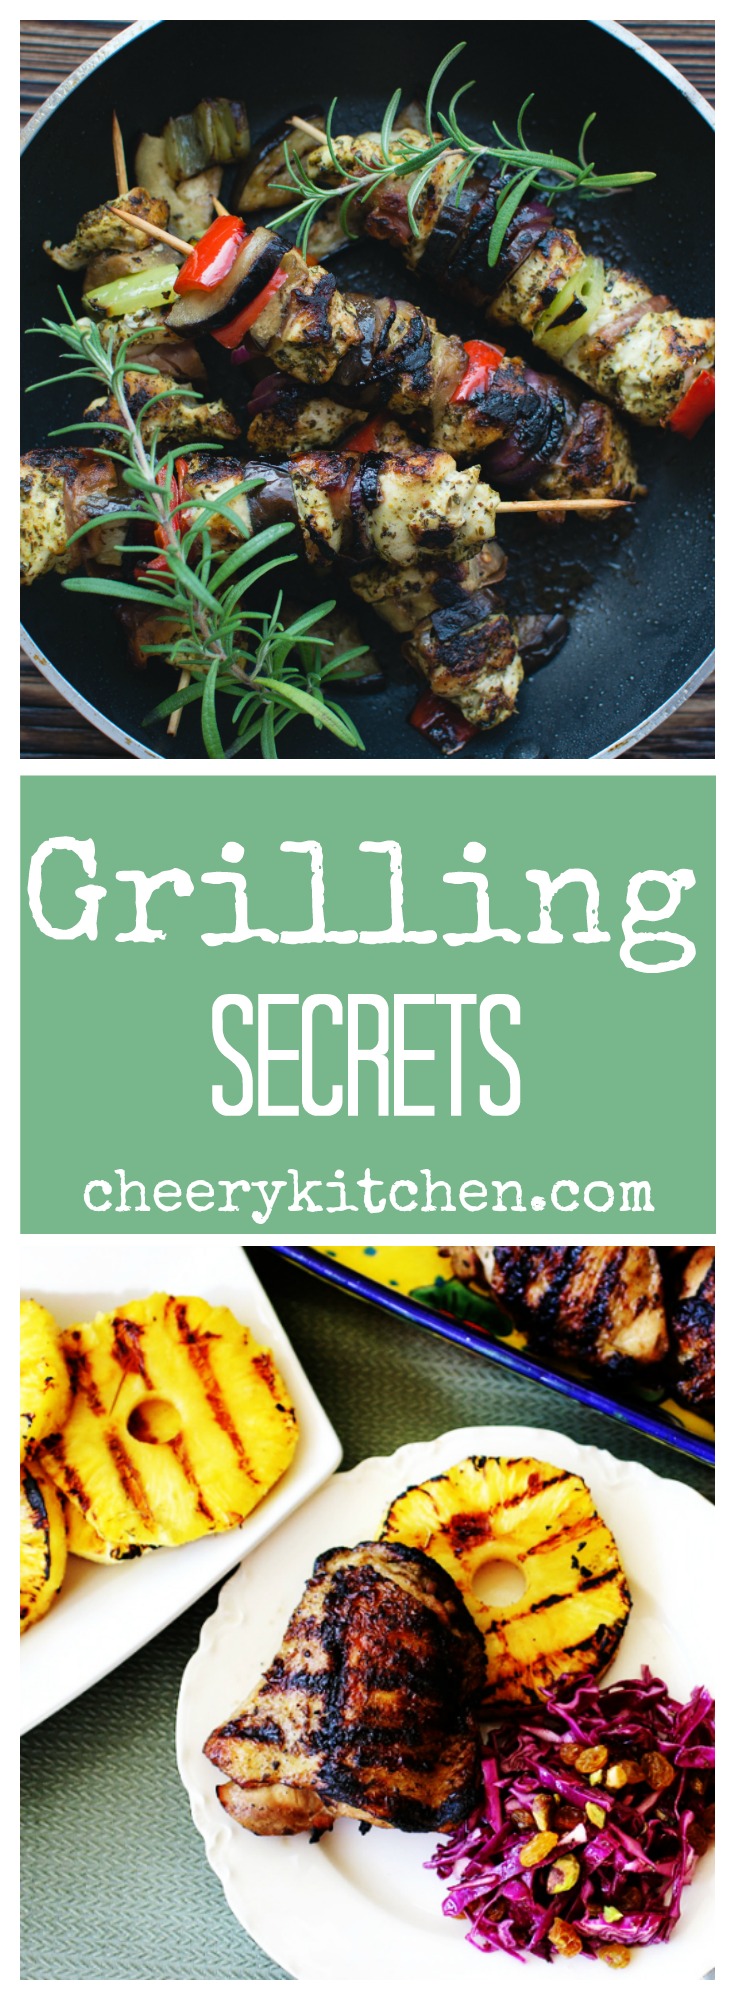 Let me let you in on a secret - Grilling is easy when you use these ideas! Plus some of my favorite grilling recipes!